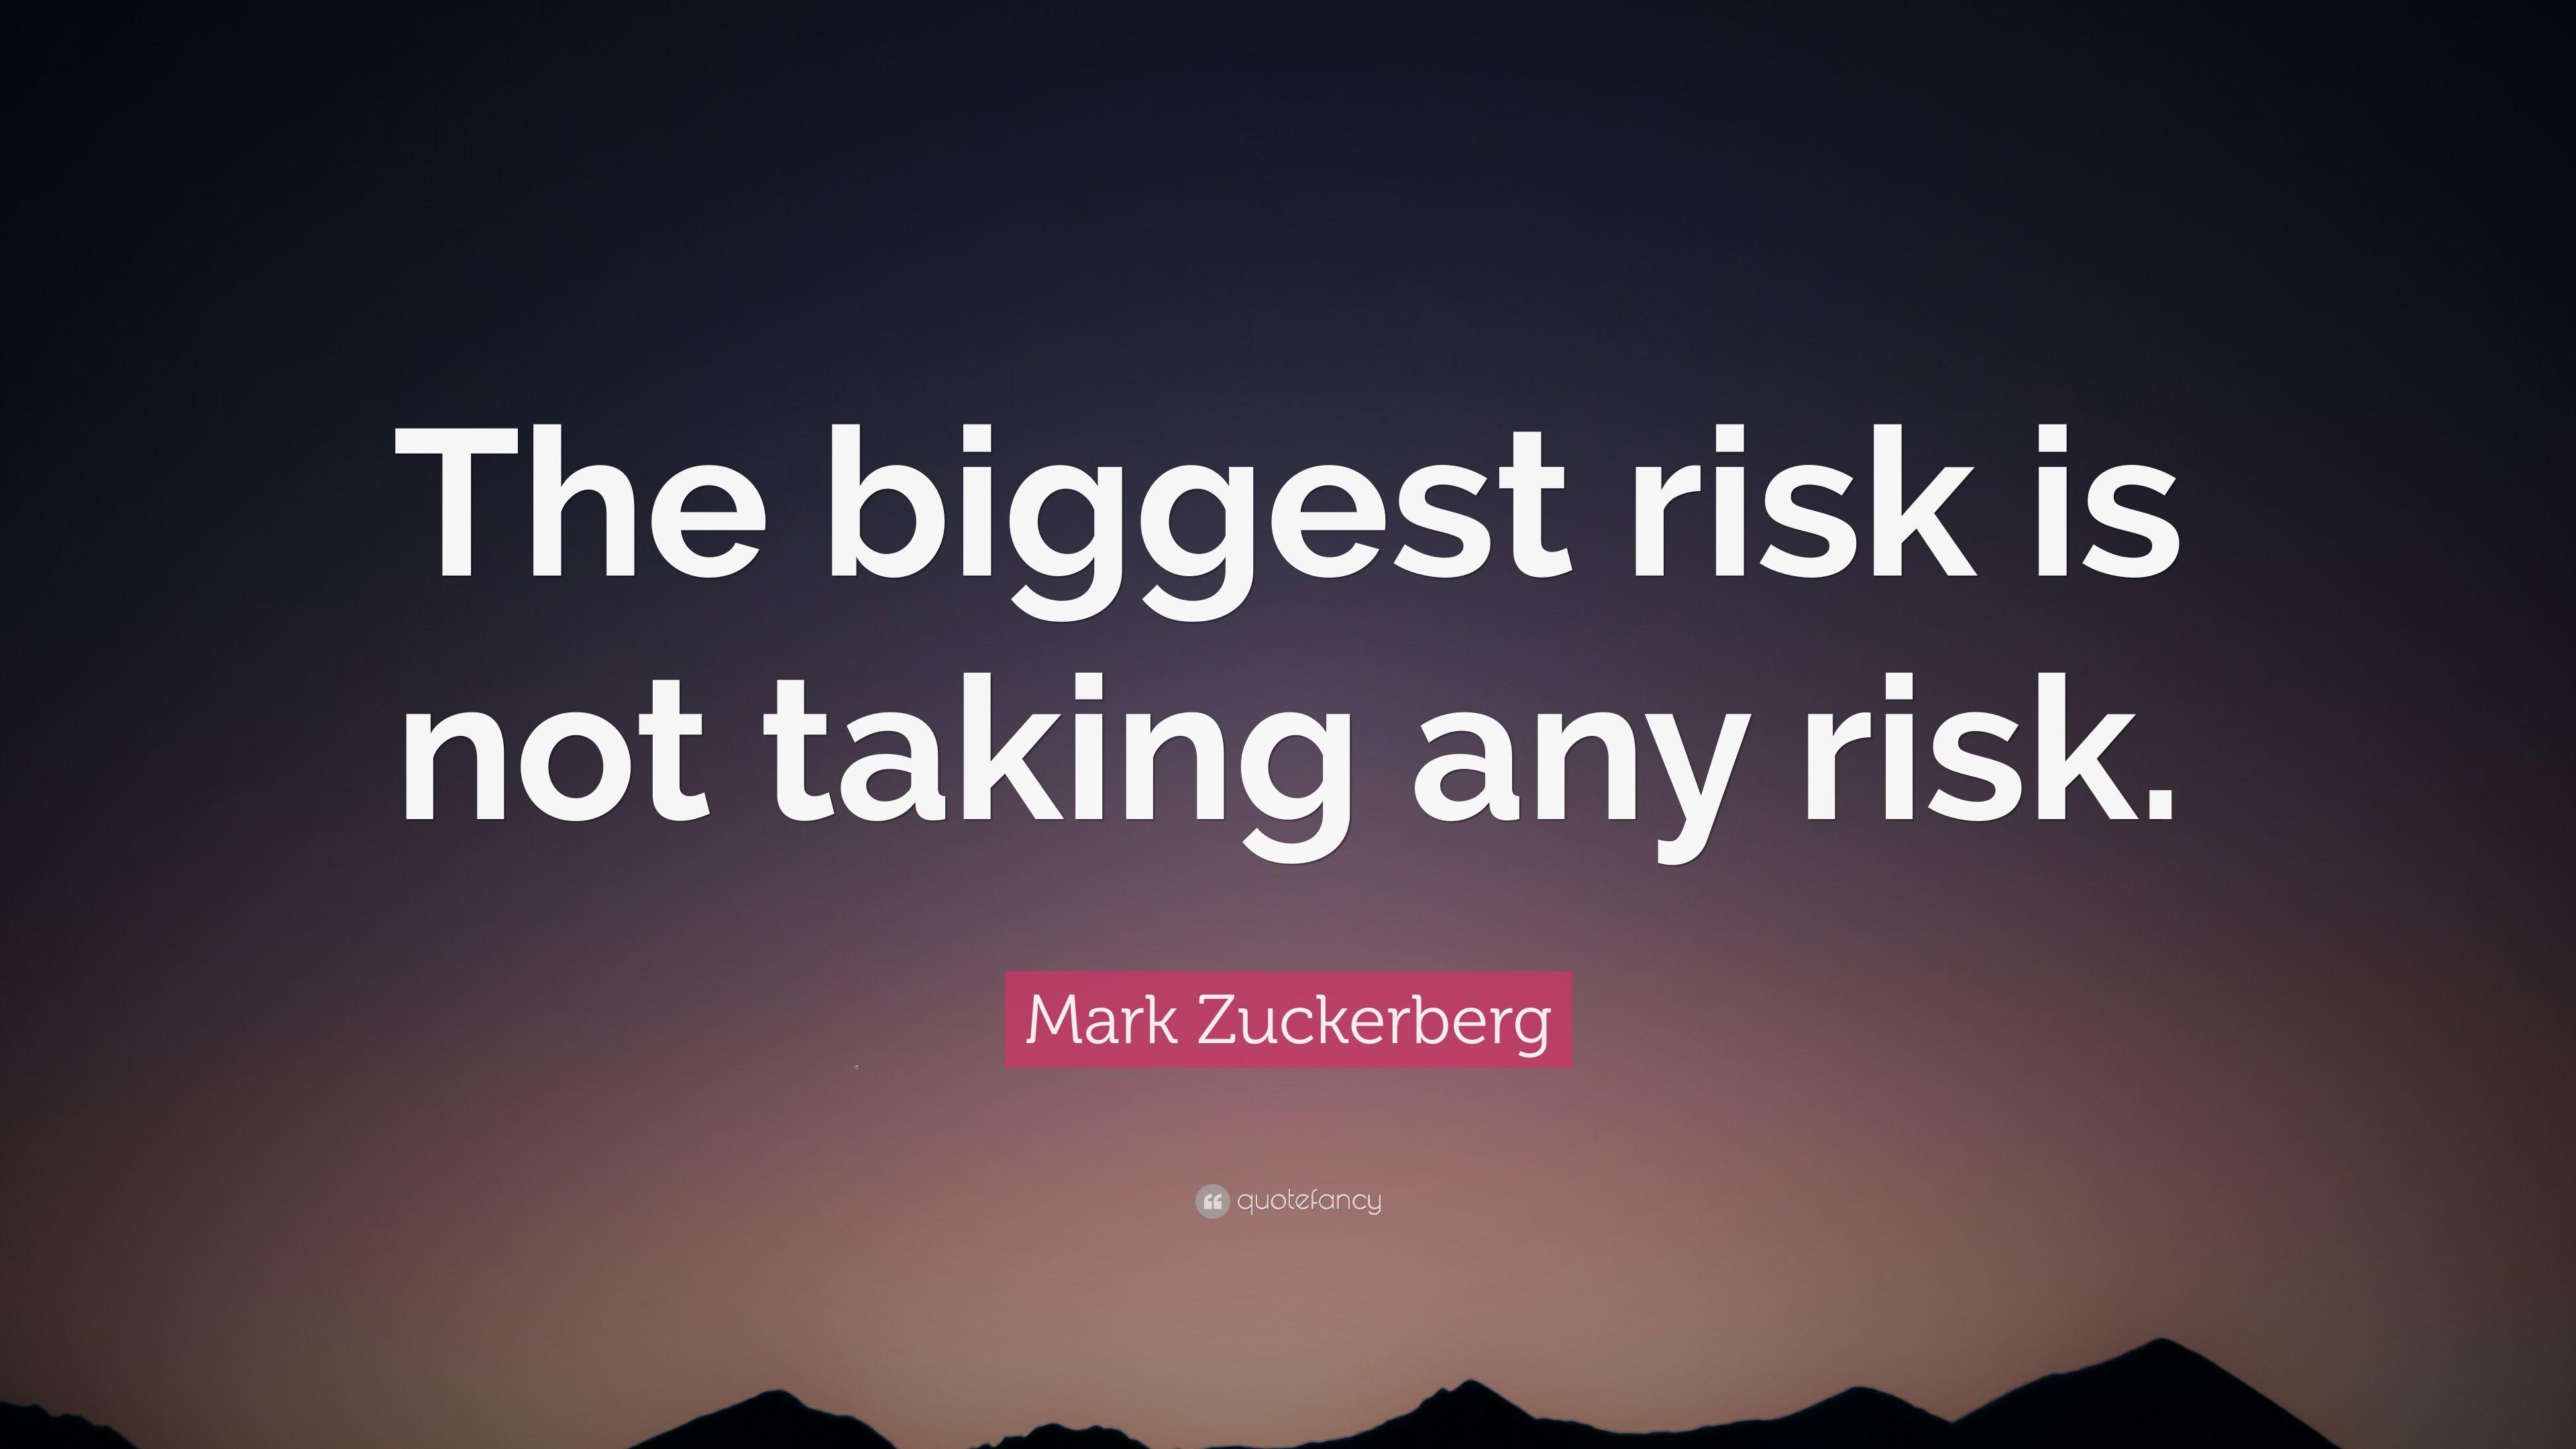 Mark Zuckerberg Quote: “The biggest risk is not taking any risk